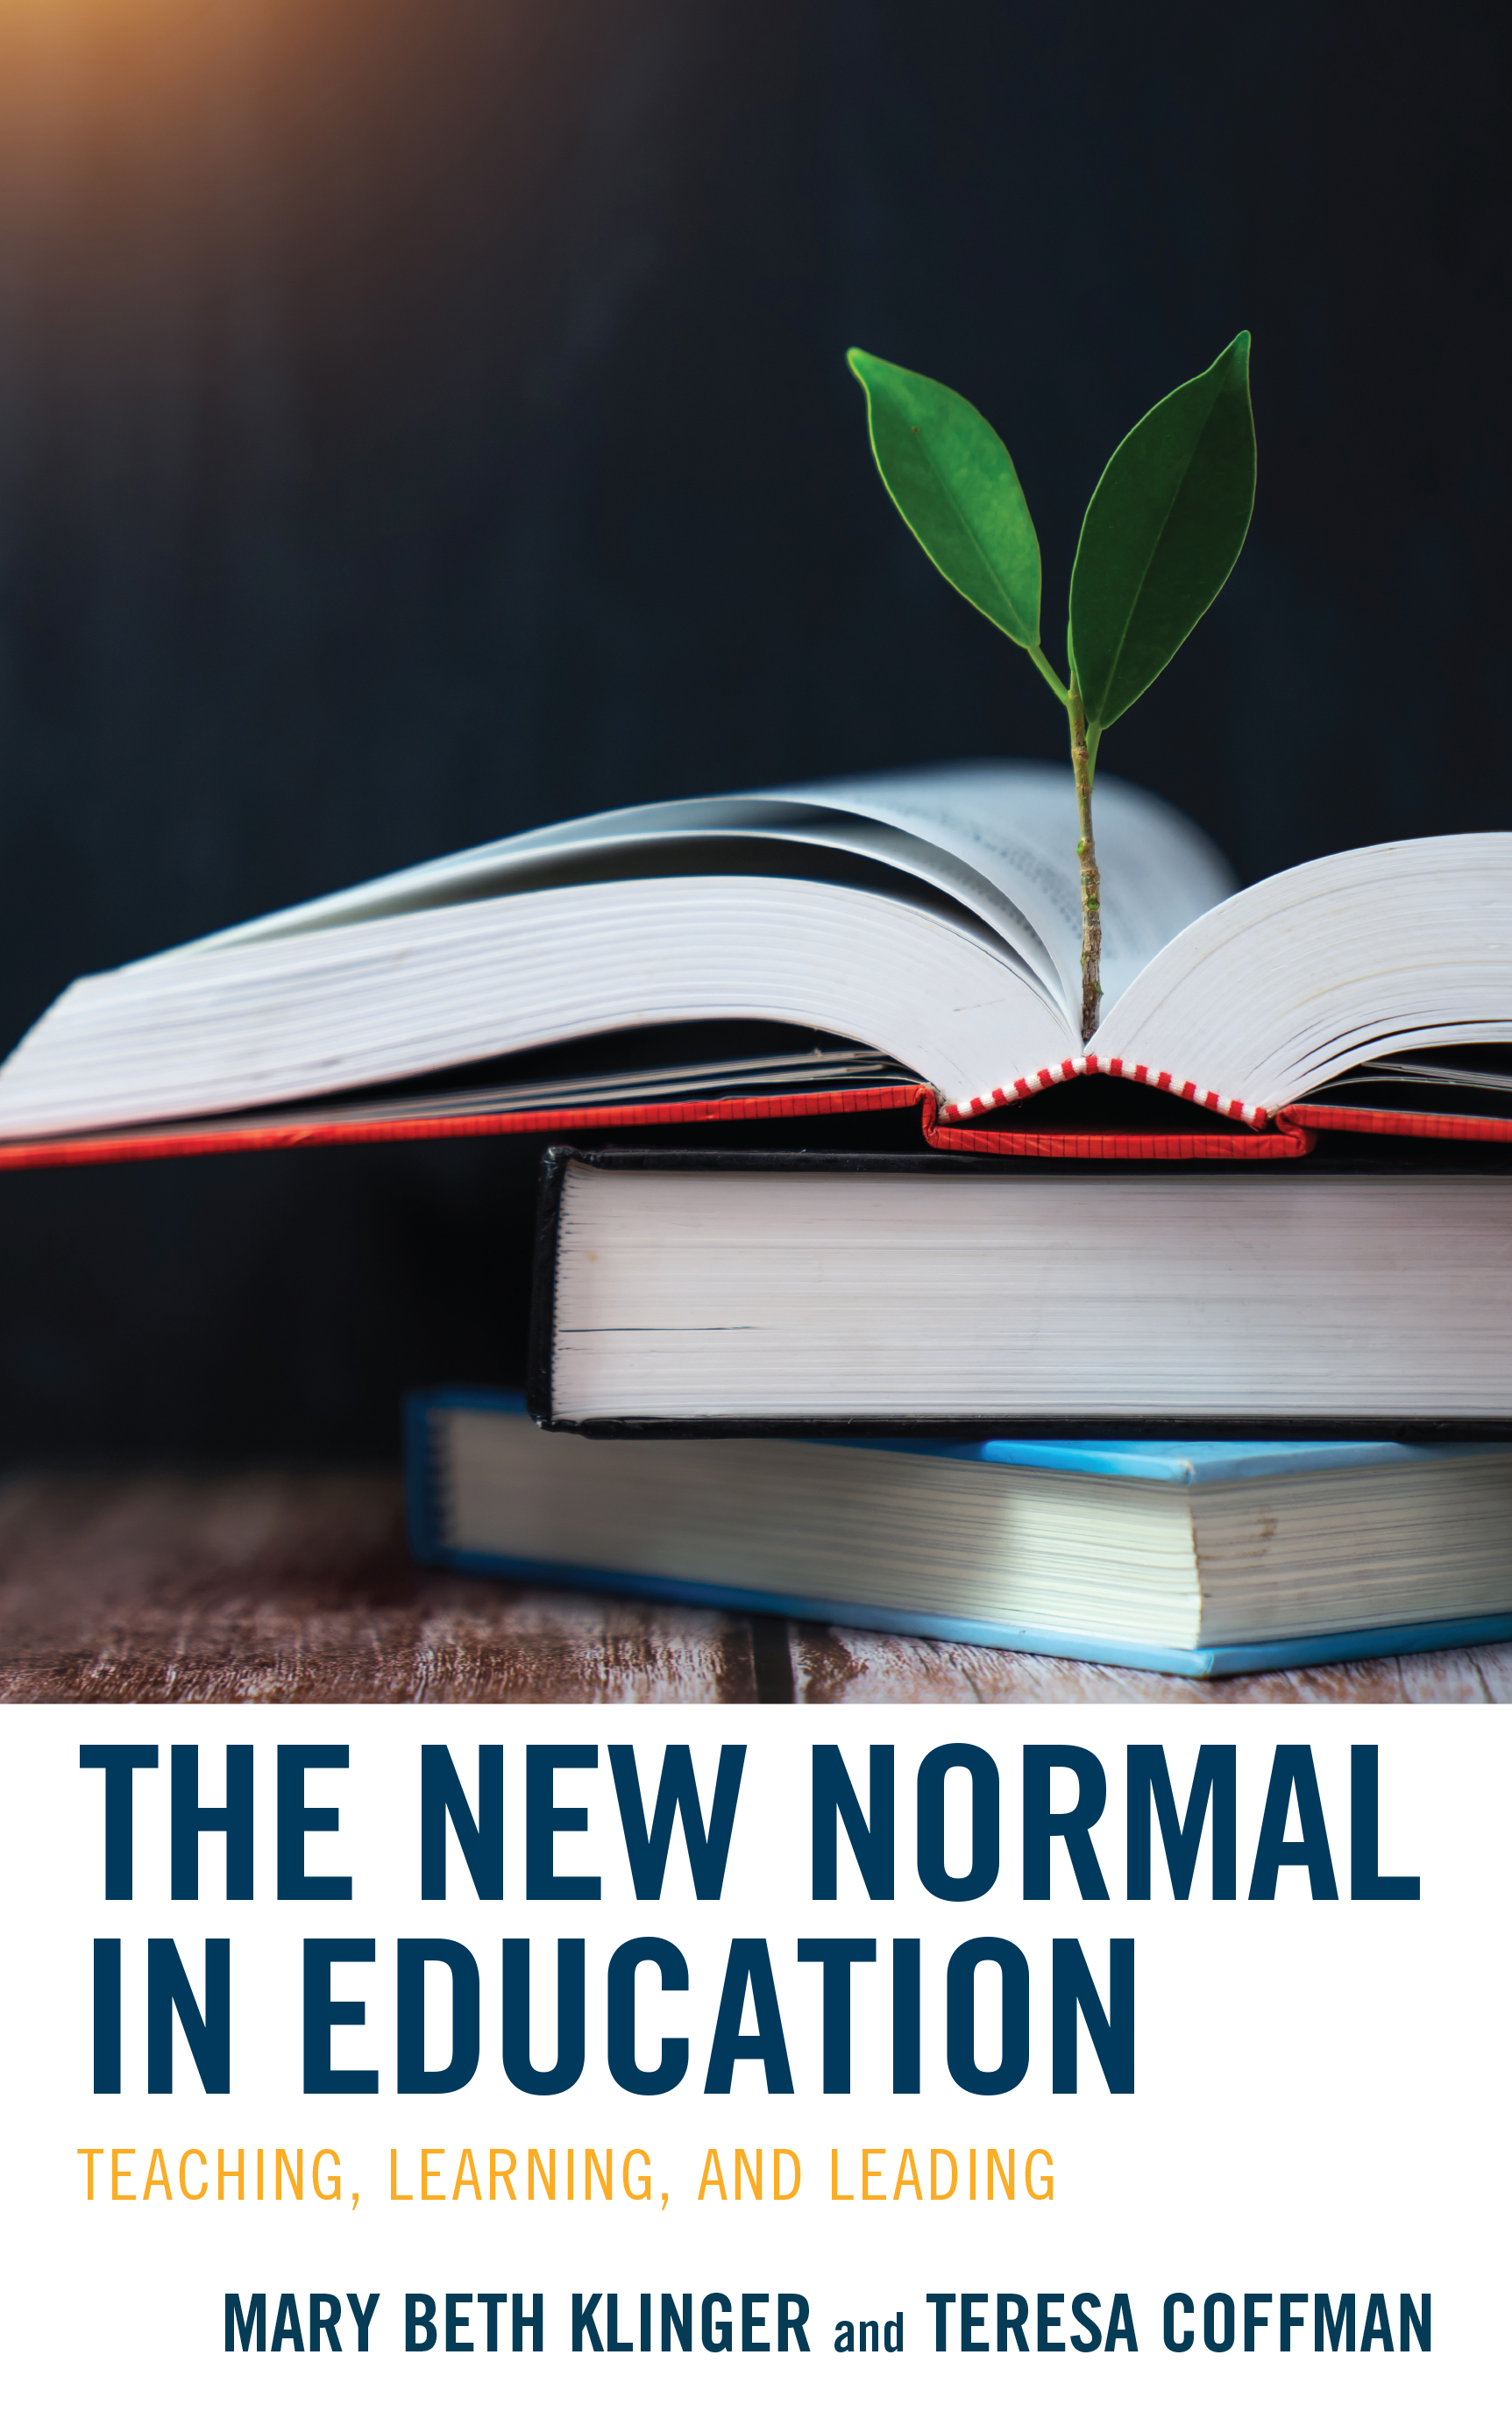 The New Normal in Education: Teaching, Learning, and Leading